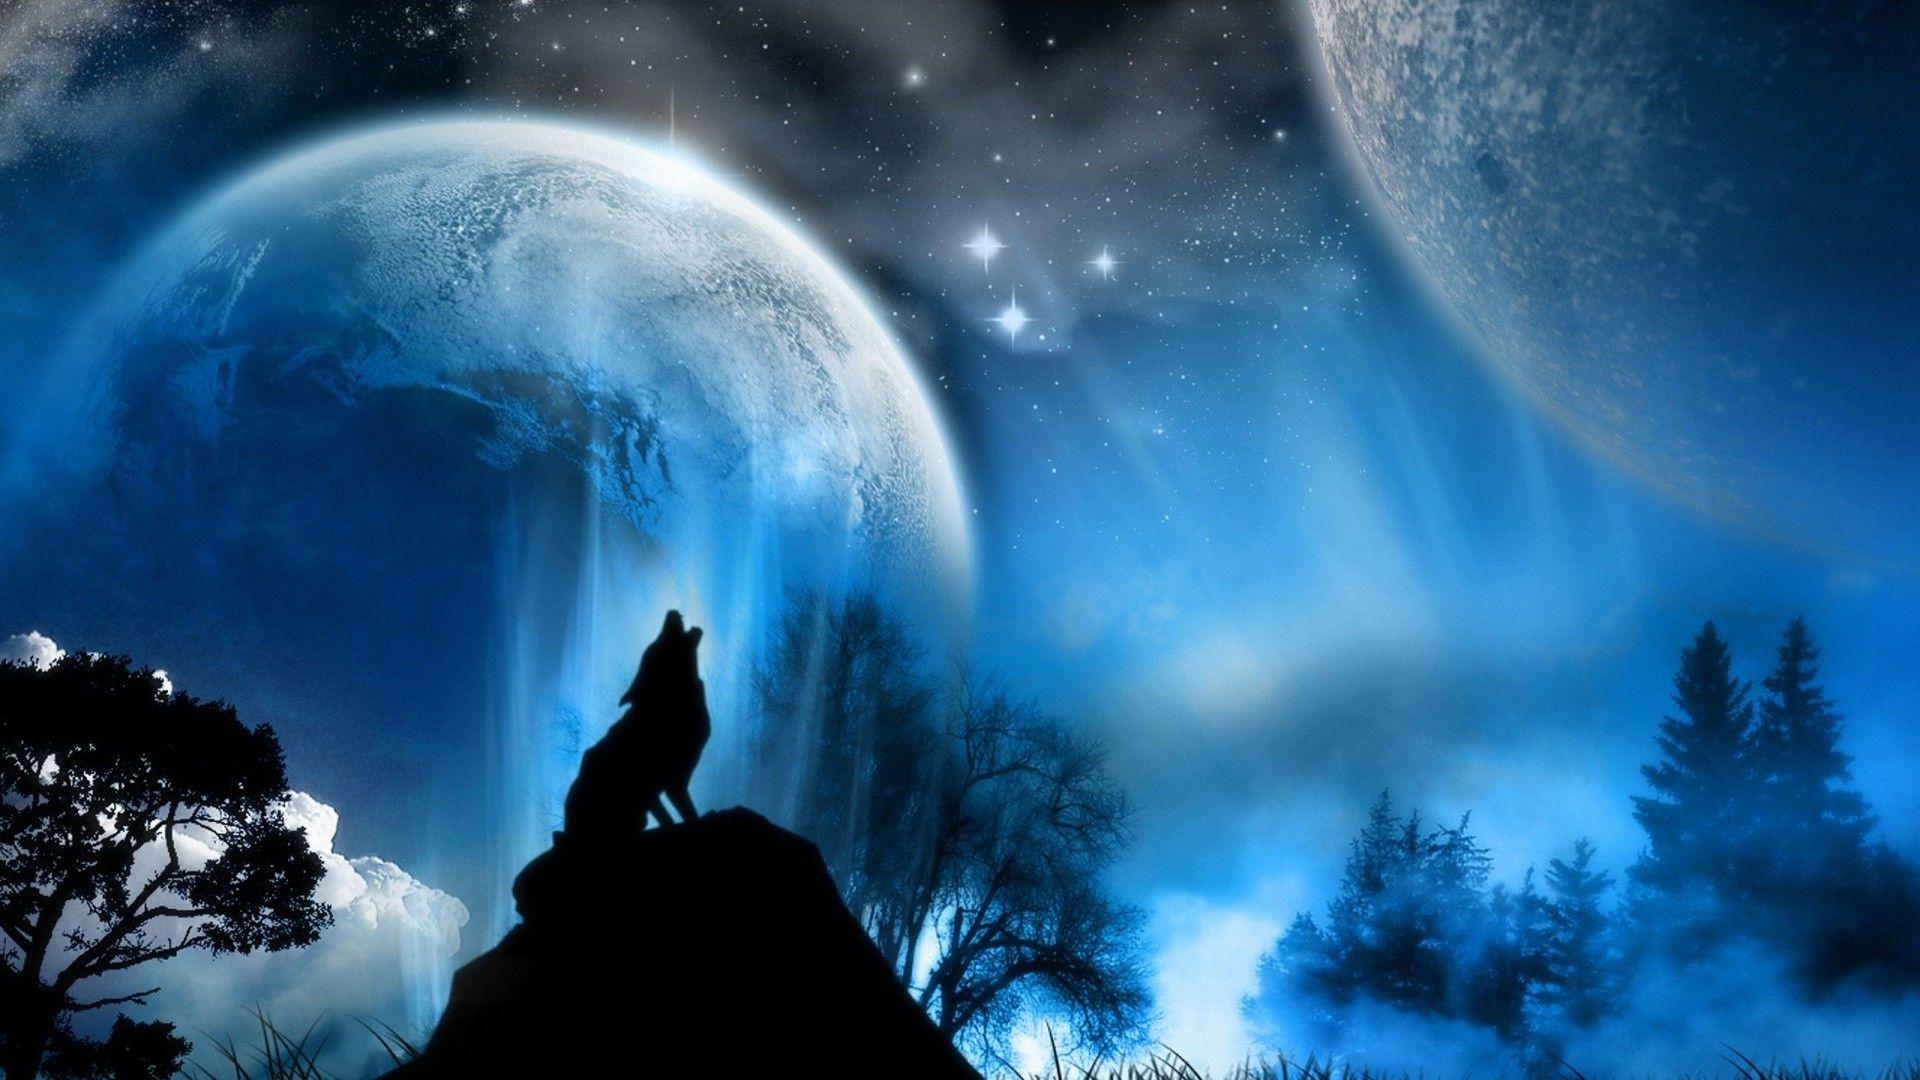 Olf Howling HD Wallpaper, Background Image